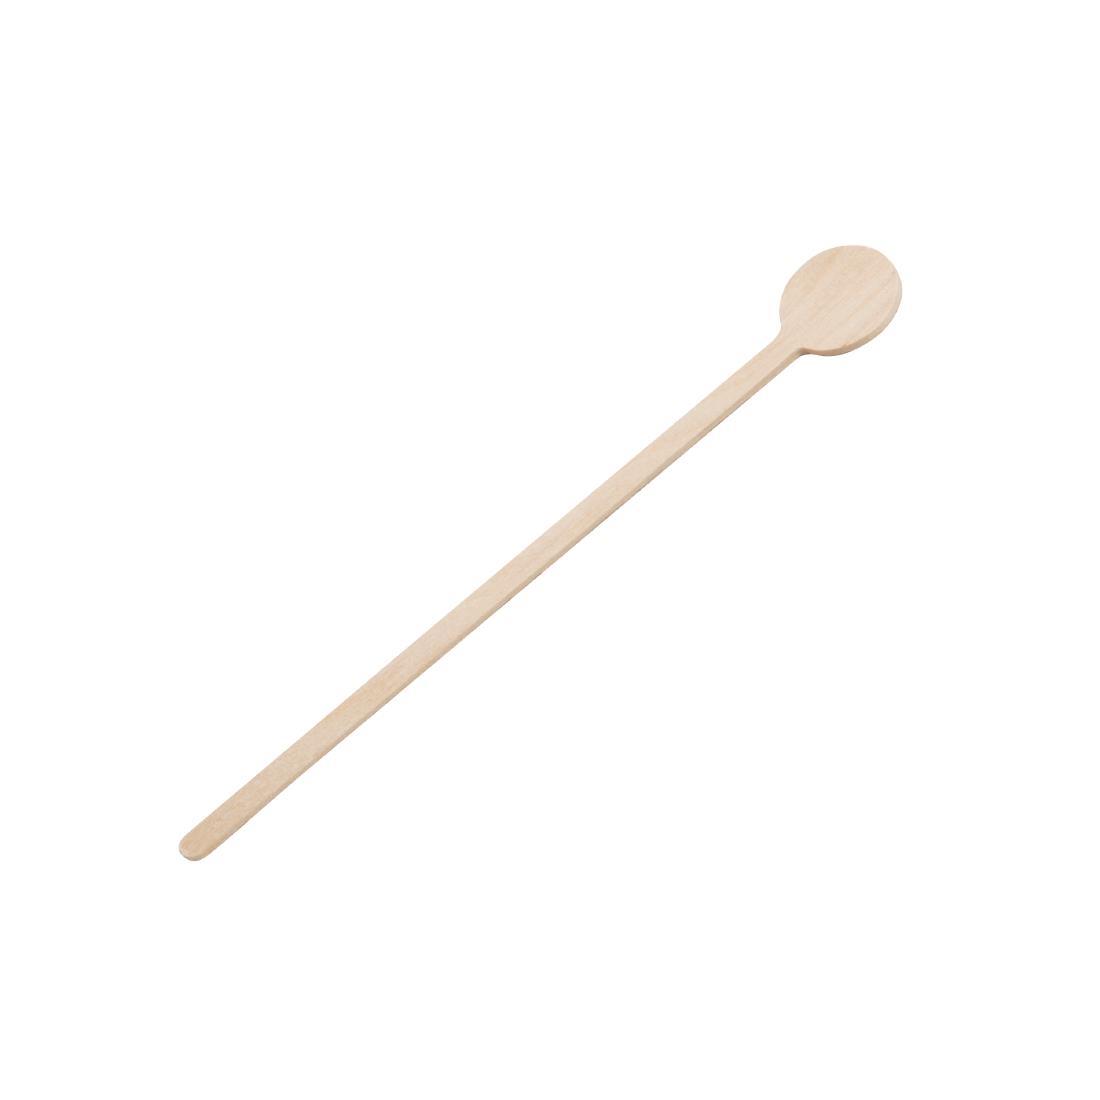 Fiesta Compostable Wooden Cocktail Stirrers 150mm (Pack of 100) - DB493  - 1